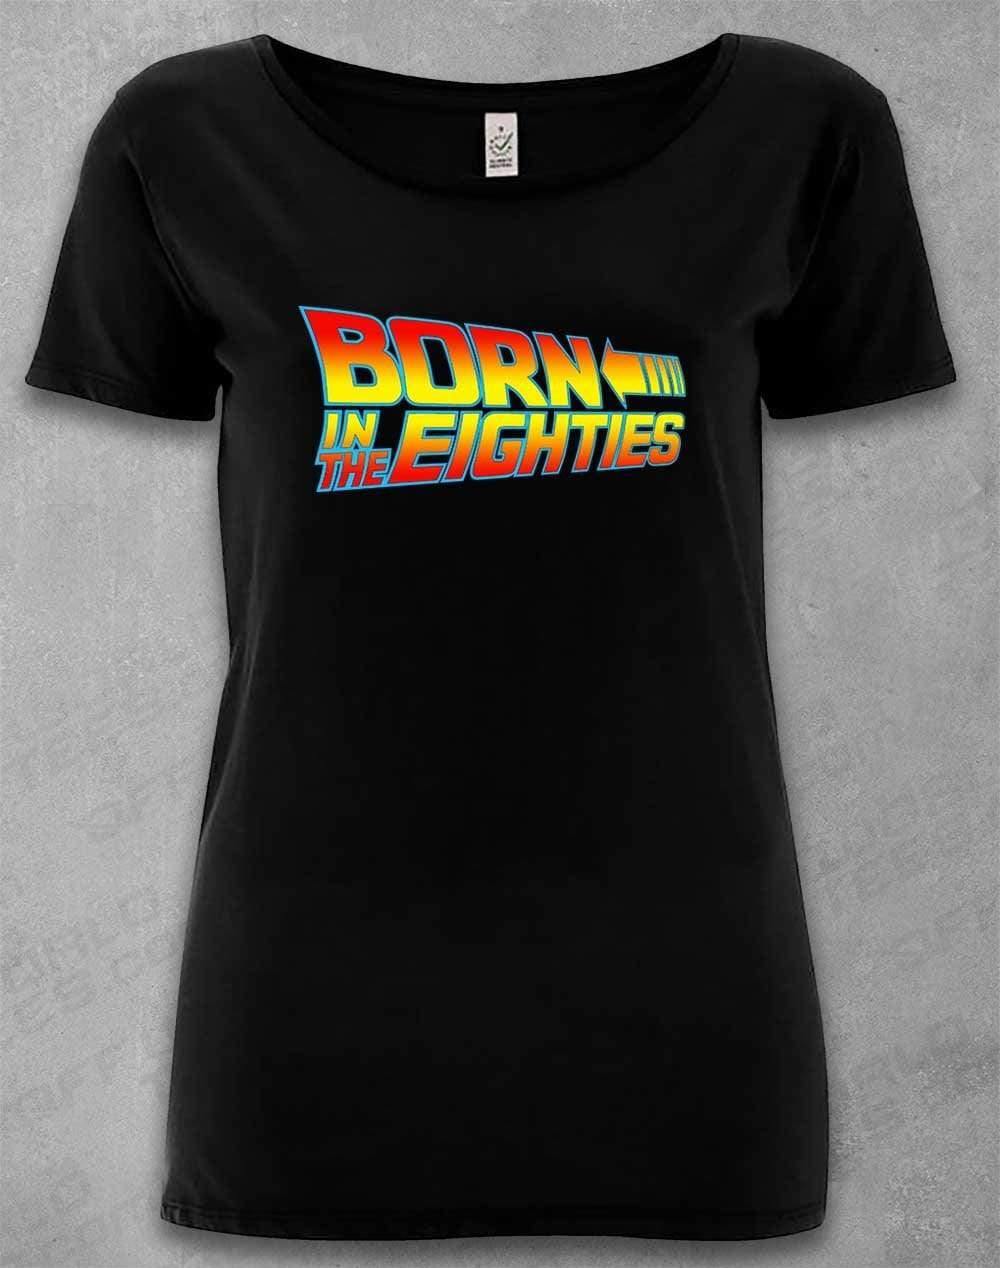 DELUXE Born in the... (CHOOSE YOUR DECADE!) Organic Scoop Neck T-Shirt 1980s - Black / 8-10  - Off World Tees